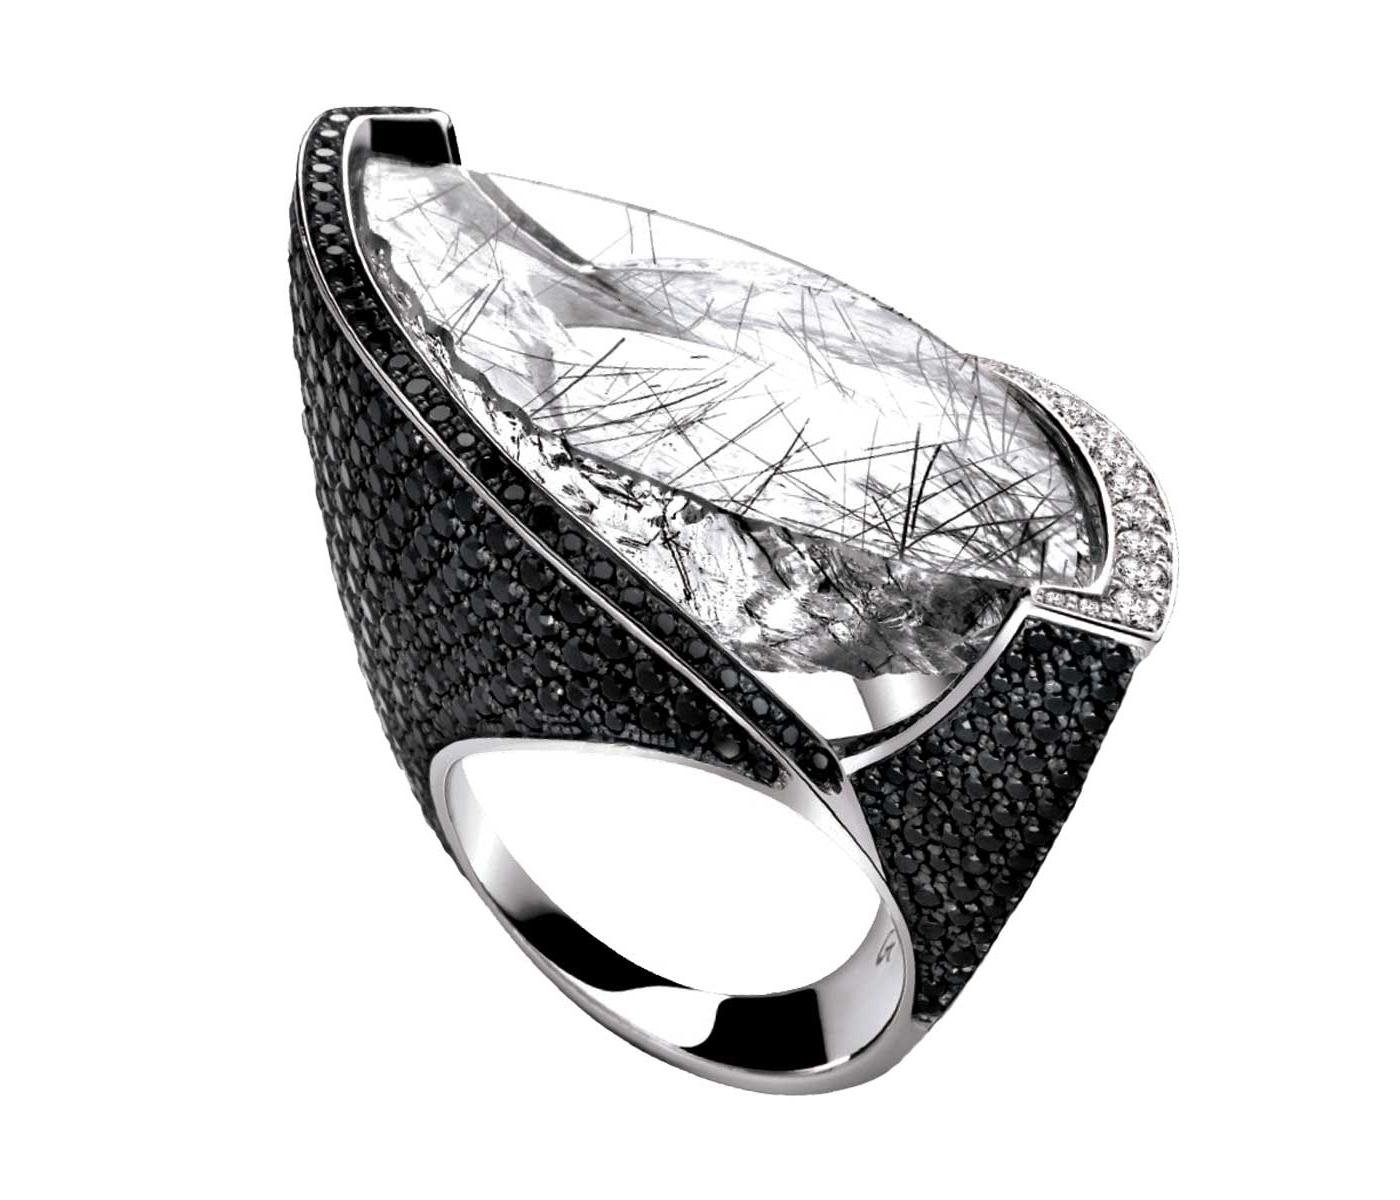 Ring by Jean Marc Garel